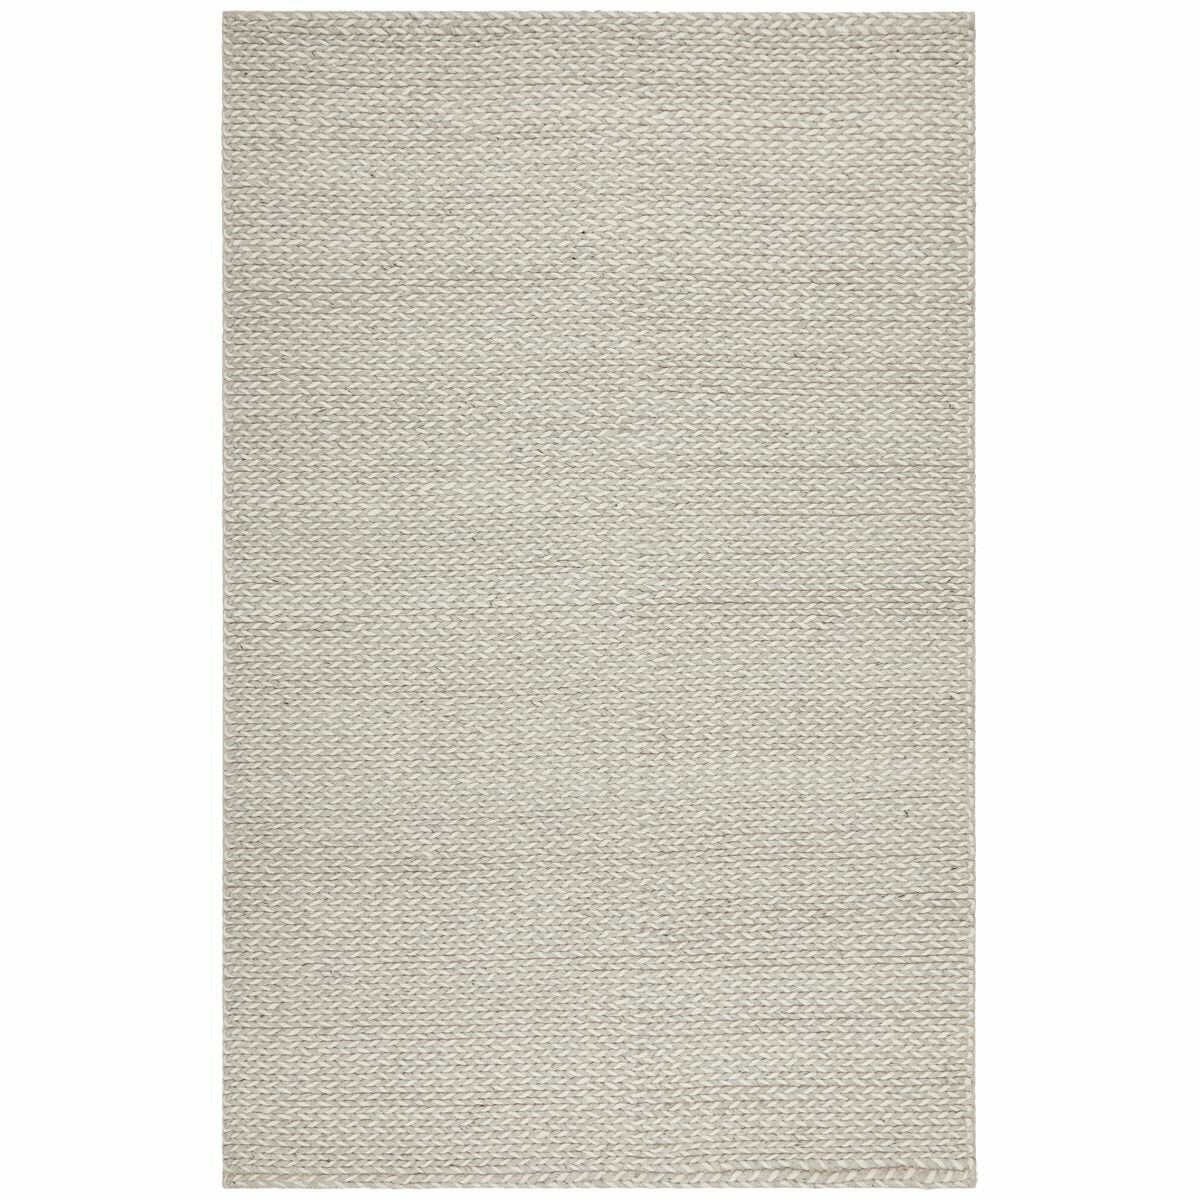 Image of Rug Culture Helena Woven Wool Rug Grey White 280x190cm STUD-321-SIL-280190